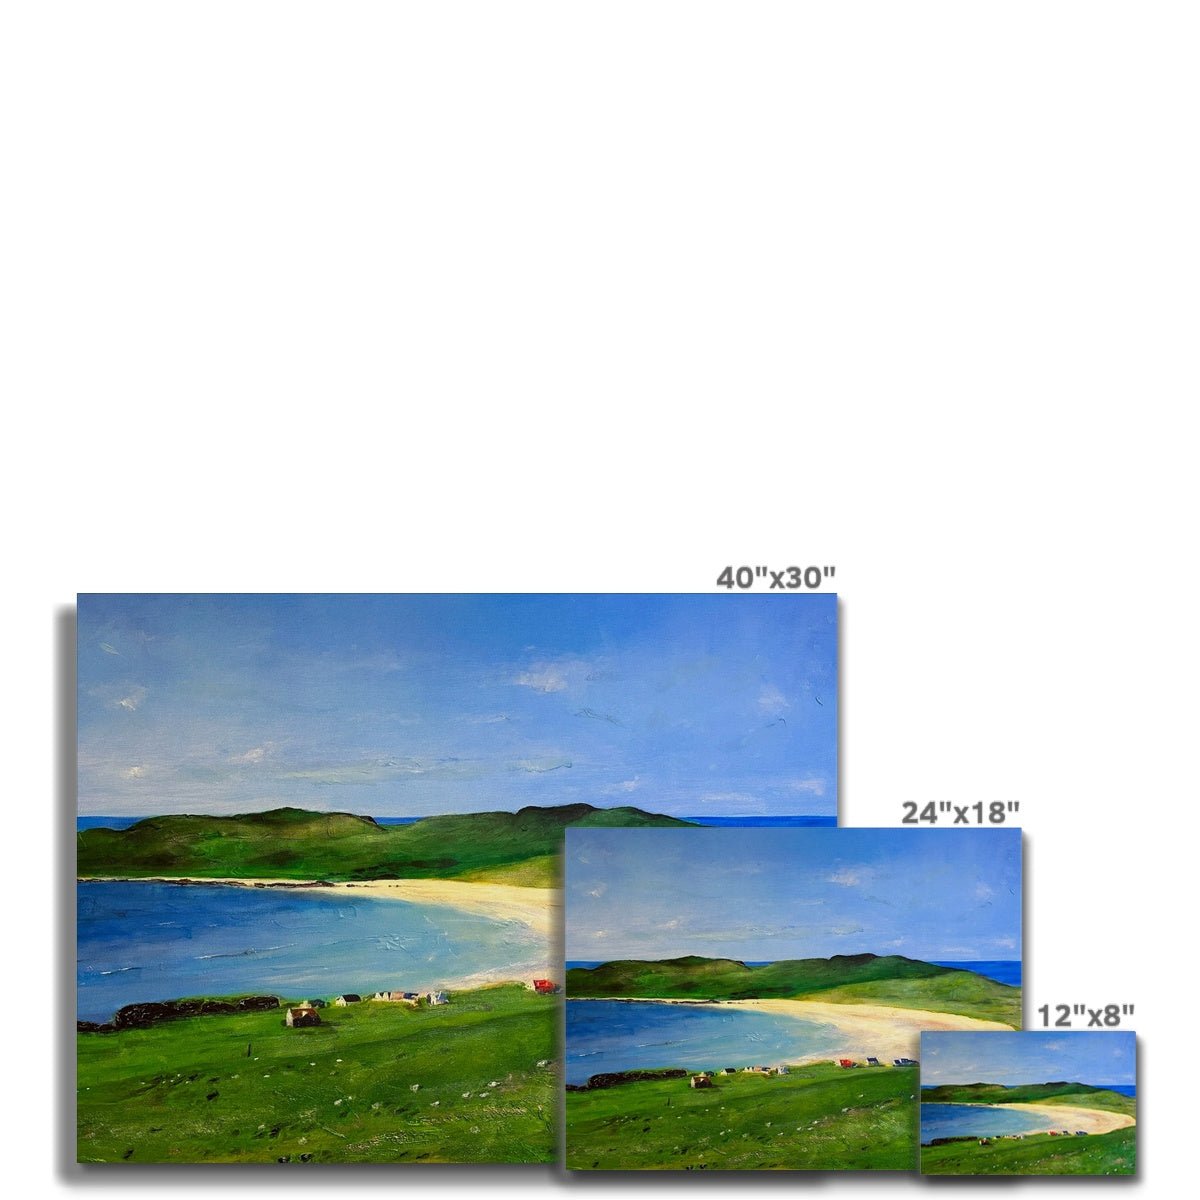 Balephuil Beach Tiree Painting | Canvas From Scotland-Contemporary Stretched Canvas Prints-Hebridean Islands Art Gallery-Paintings, Prints, Homeware, Art Gifts From Scotland By Scottish Artist Kevin Hunter